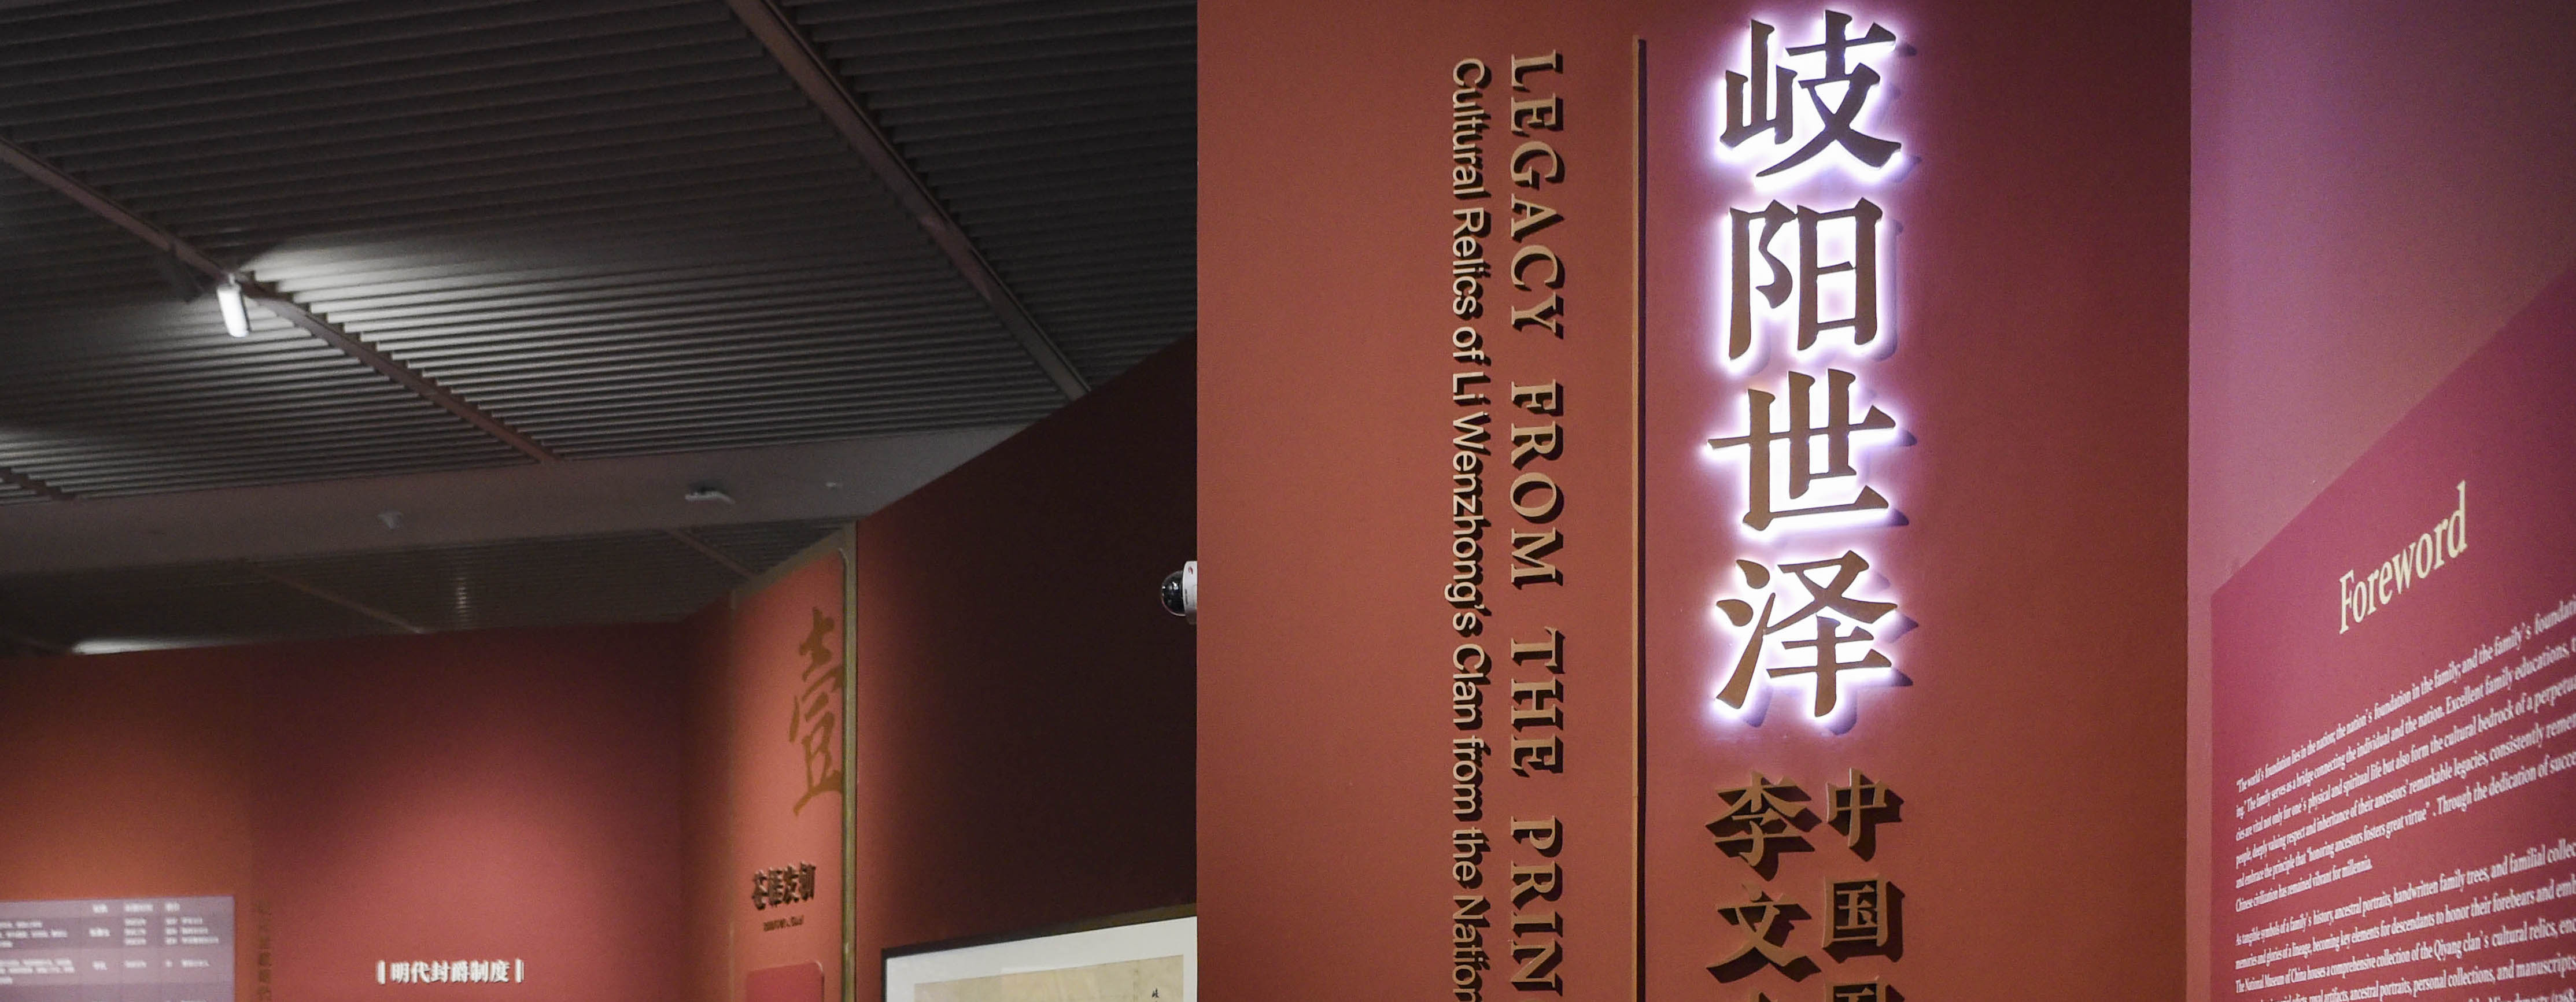 The first exhibition in the National Museum, tracing the 600-year history of Qiyang family